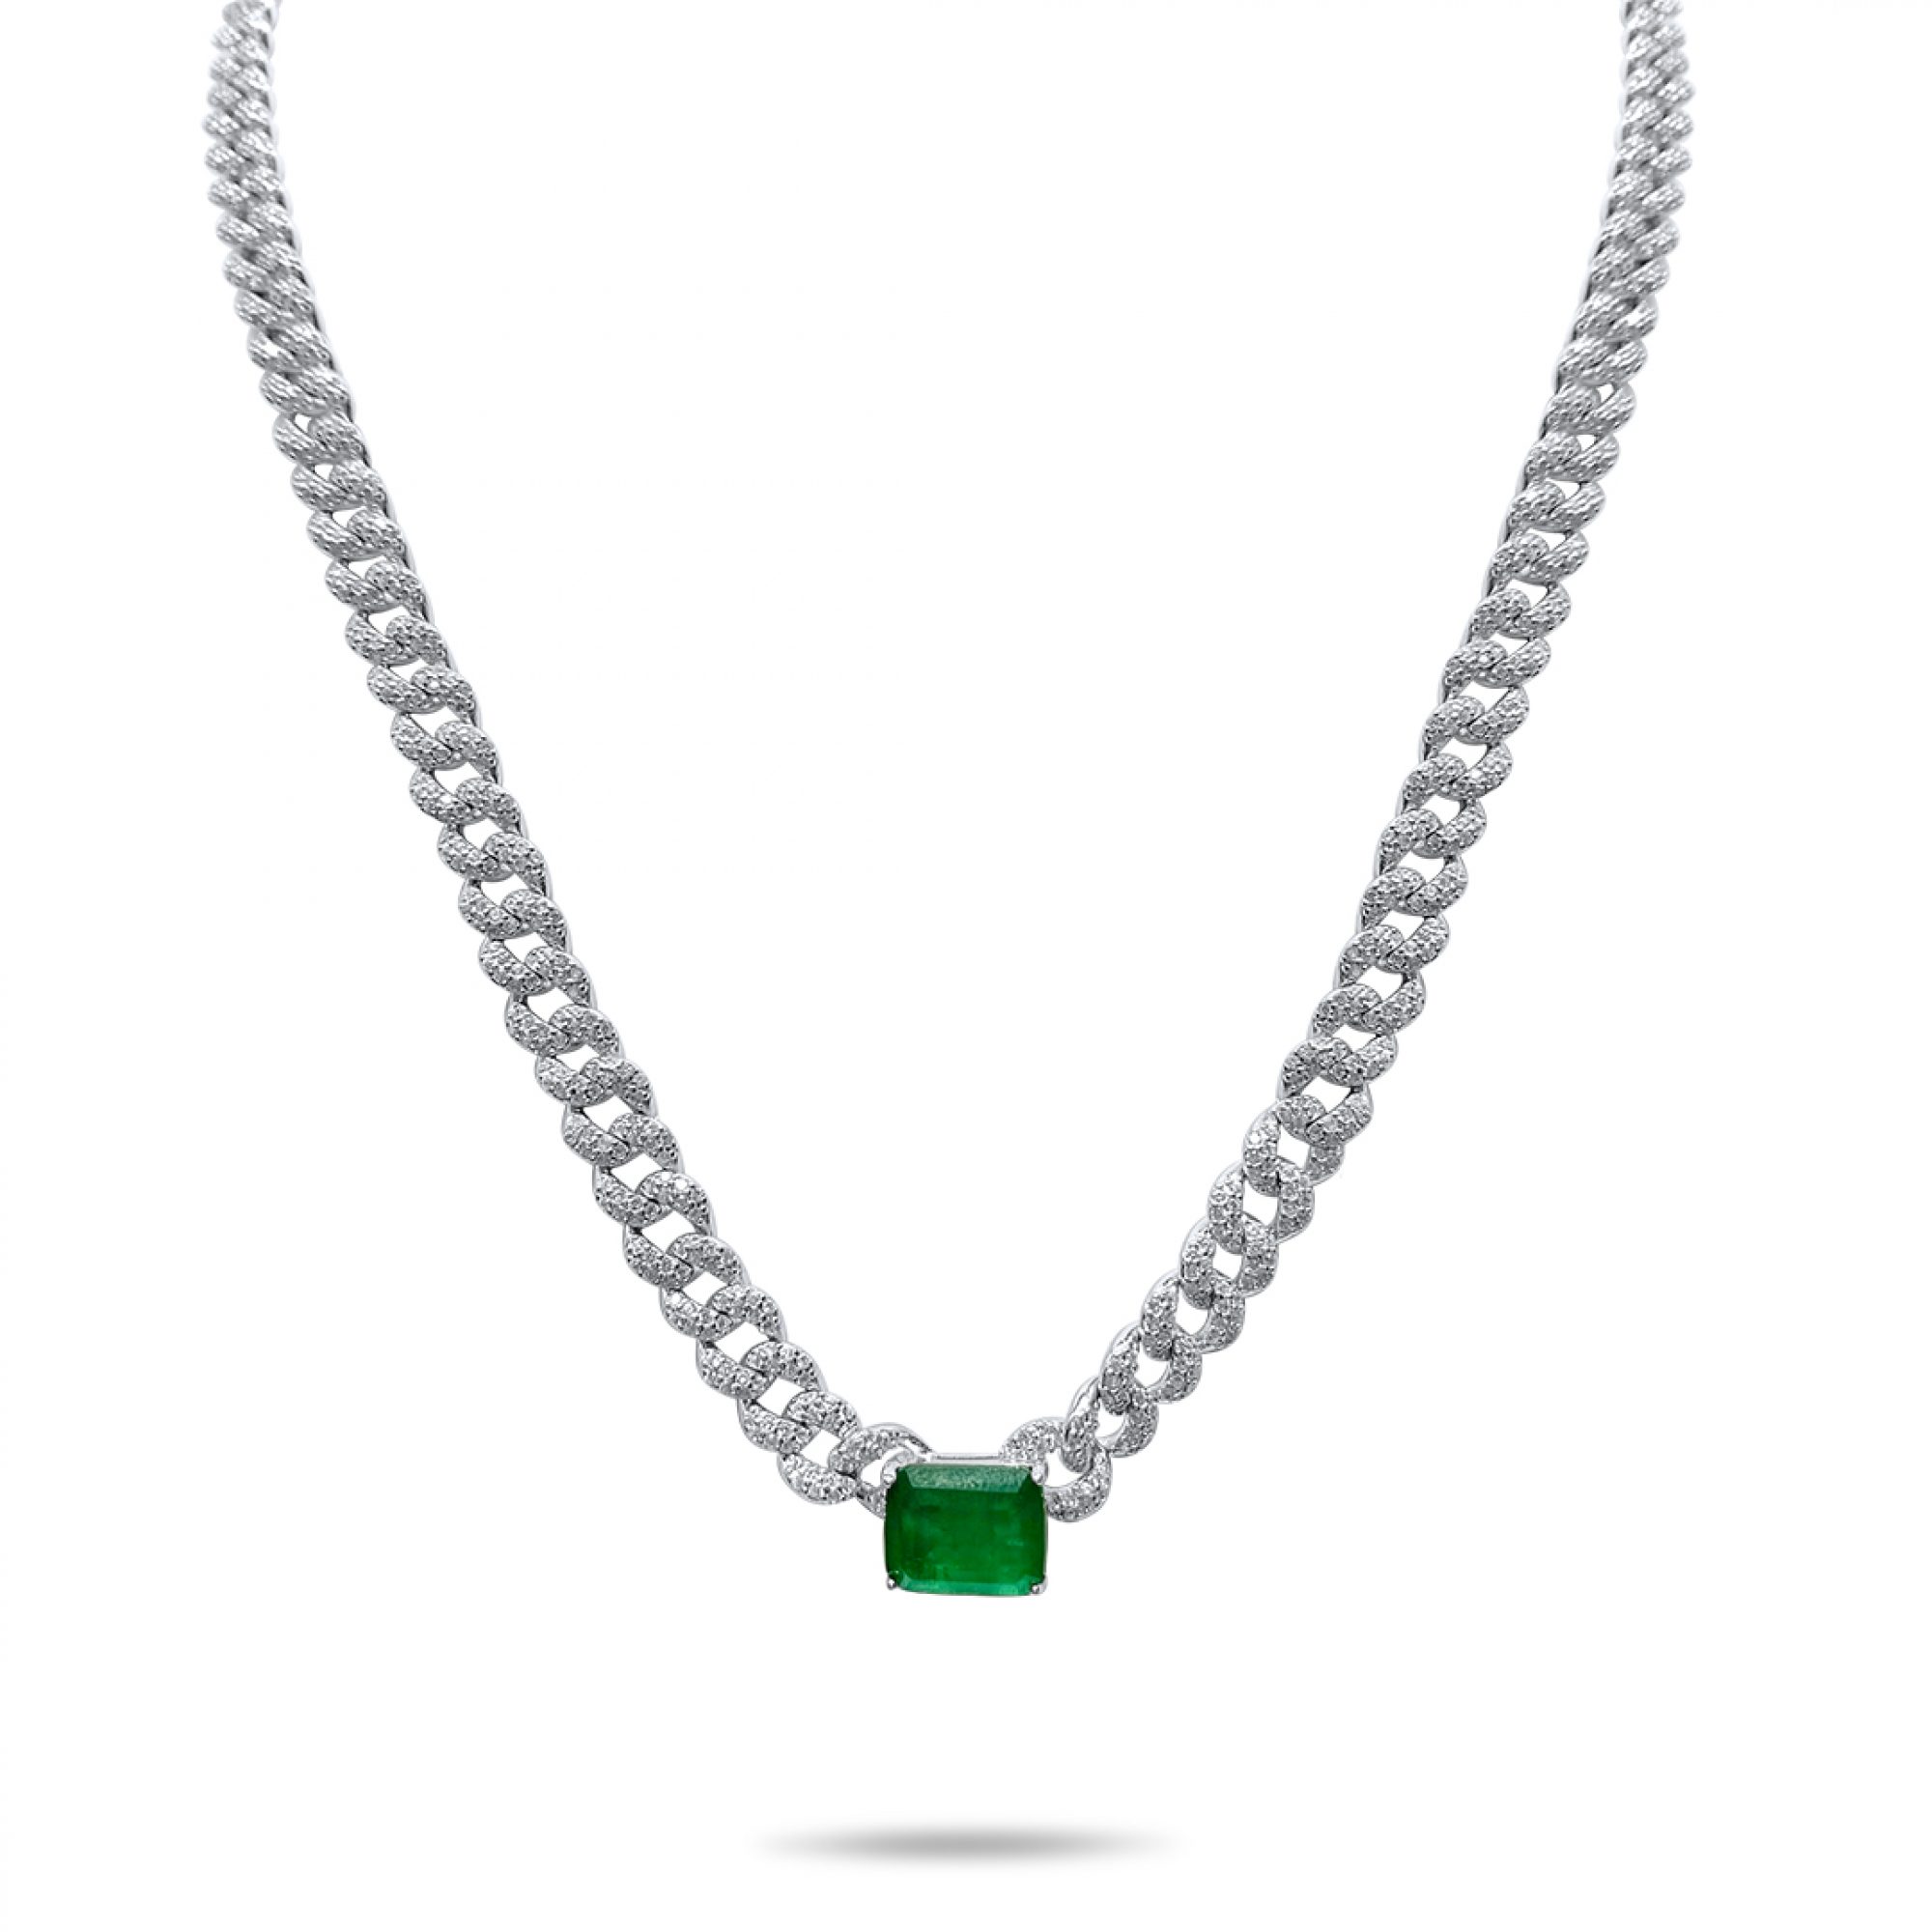 Silver chain with emerald and zircon stones